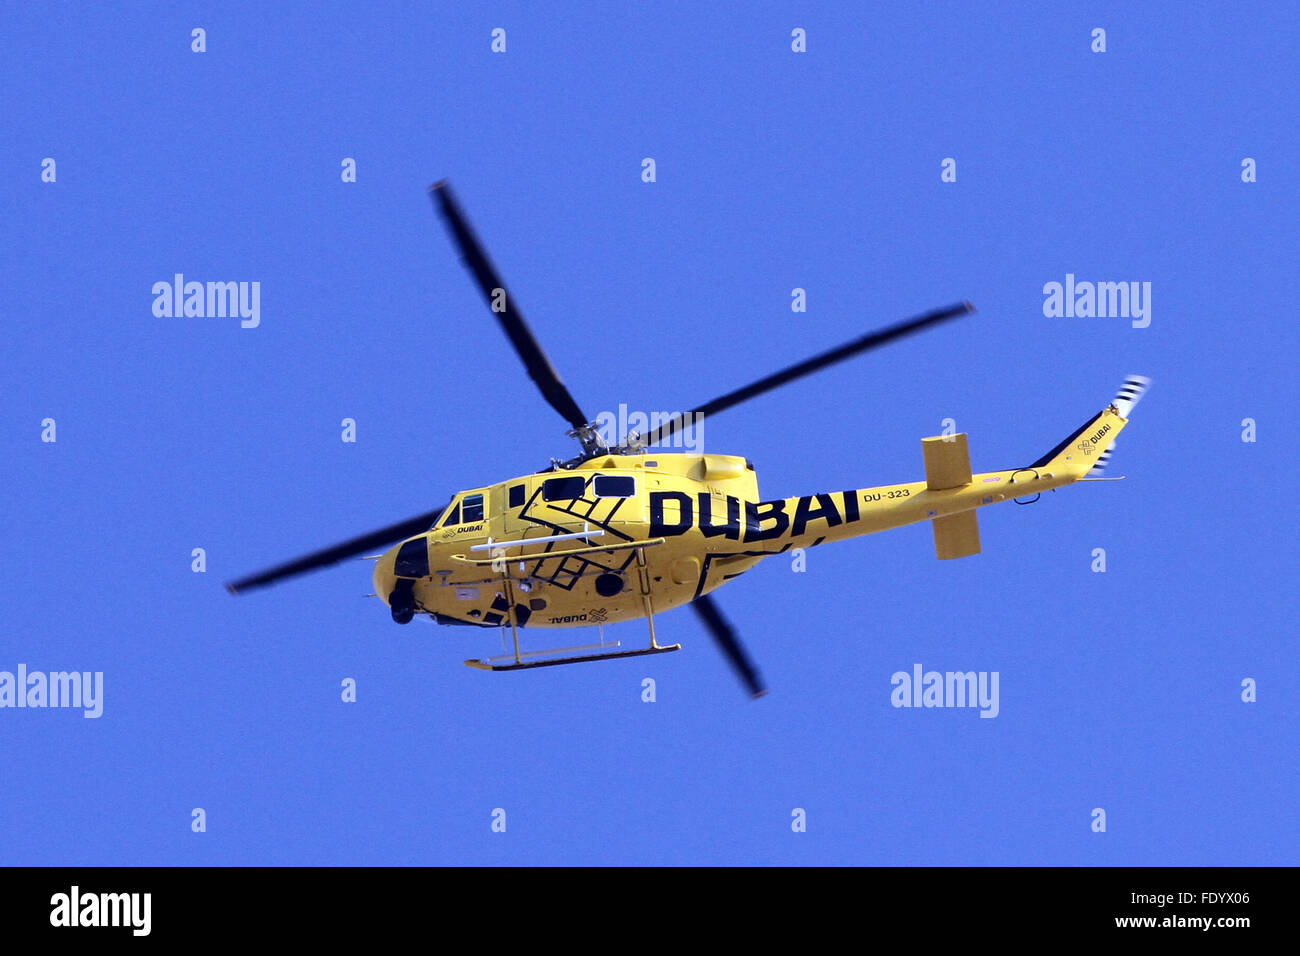 Dubai, United Arab Emirates, and helicopters in the air Stock Photo